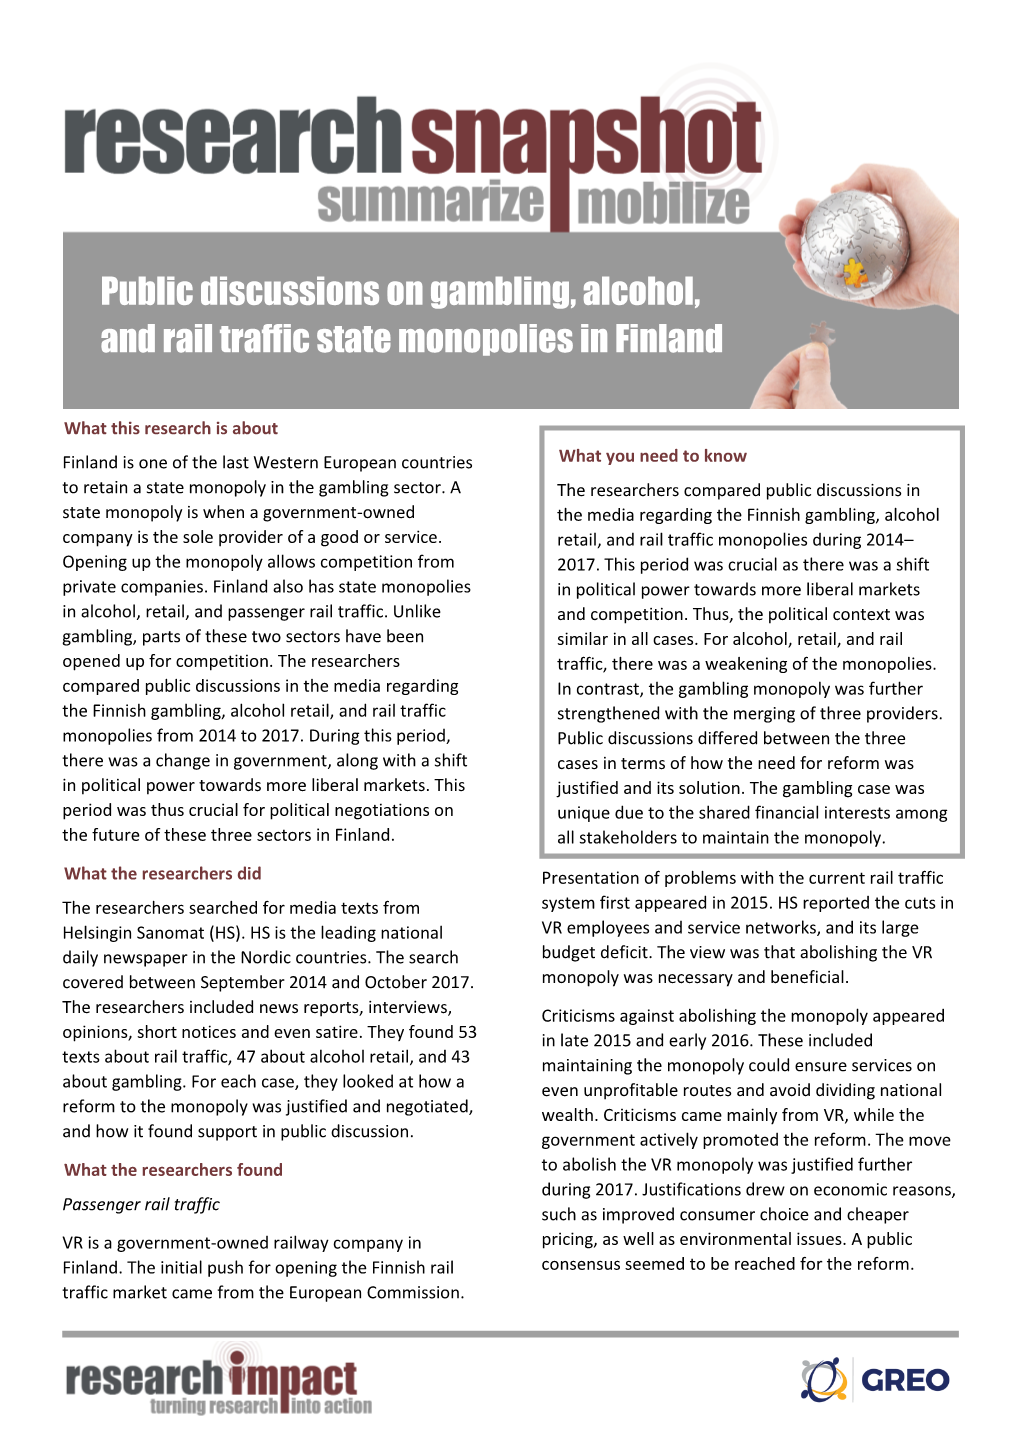 Public Discussions on Gambling, Alcohol, and Rail Traffic State Monopolies in Finland